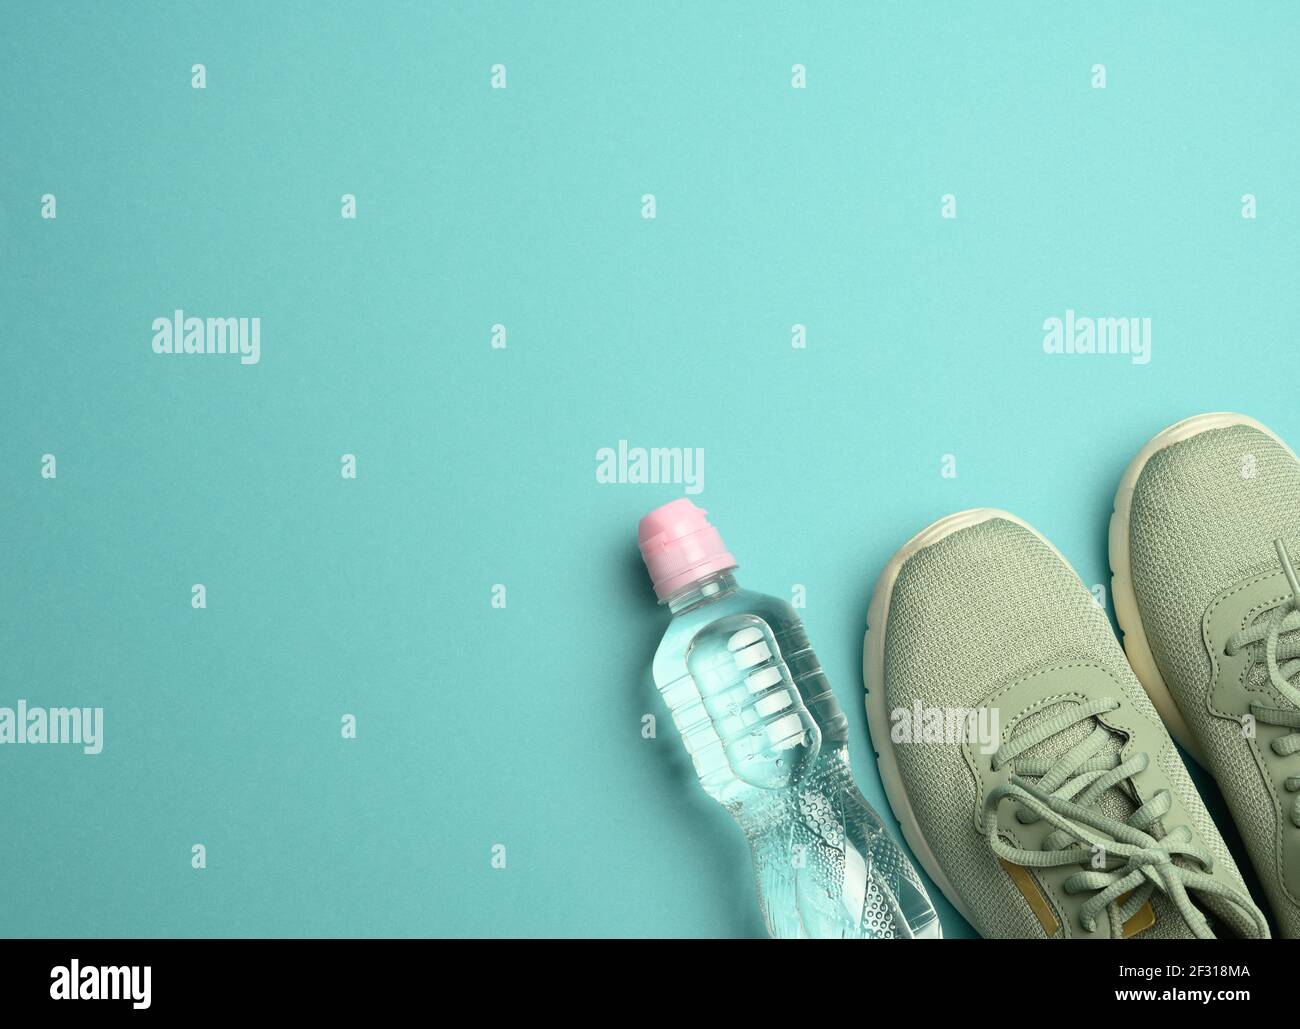 https://c8.alamy.com/comp/2F318MA/pair-of-sports-sneakers-and-a-bottle-with-mineral-water-on-a-blue-background-top-view-2F318MA.jpg